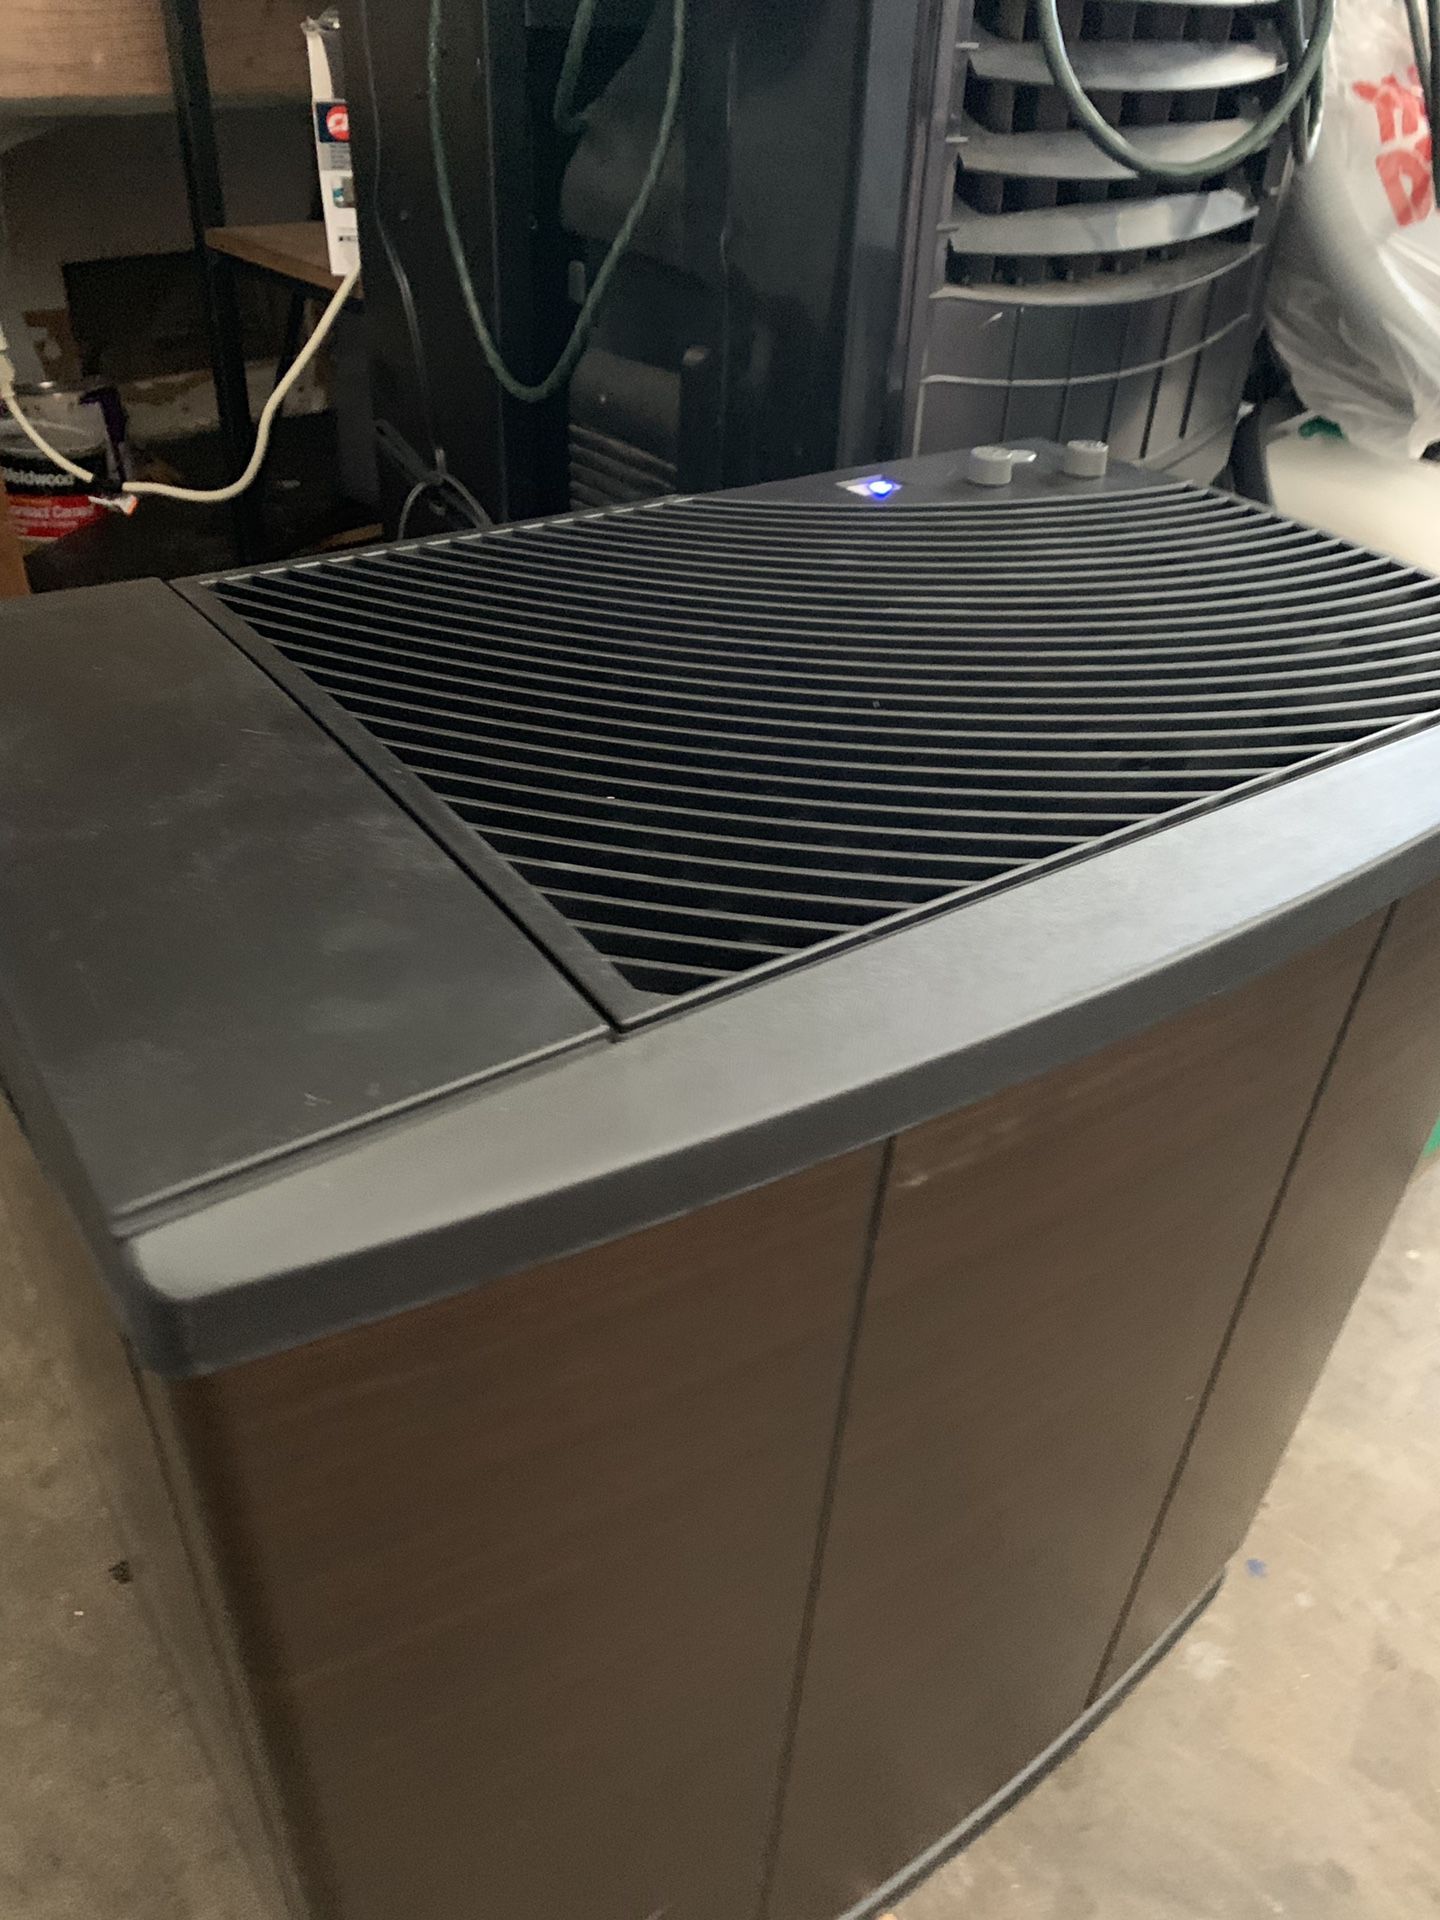 Aircare digital humidifier cover large area 4.75 Ga relief from dry air open box excellent condition